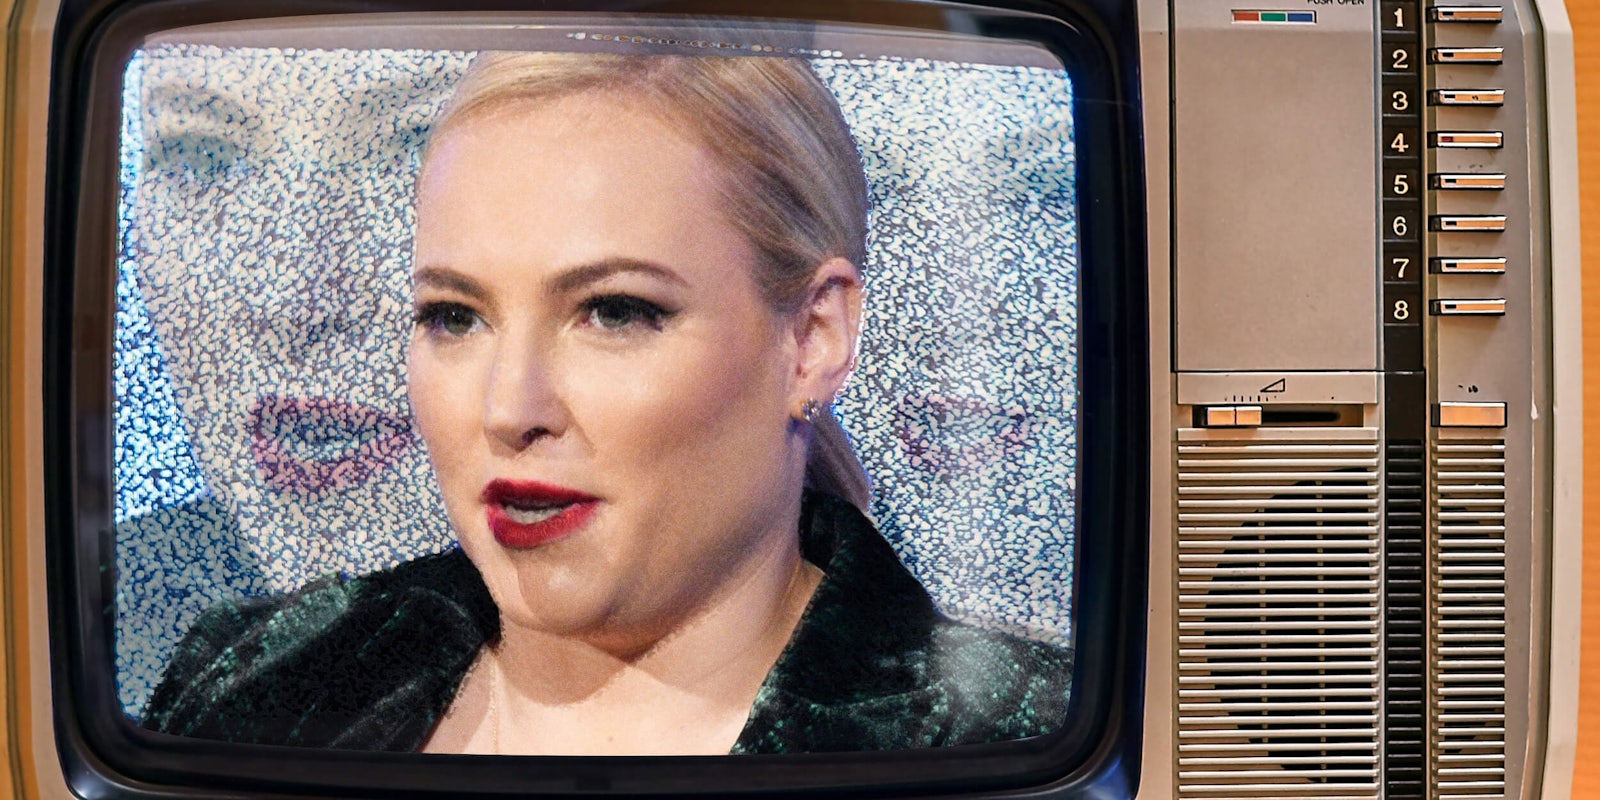 Meghan McCain on an old television set